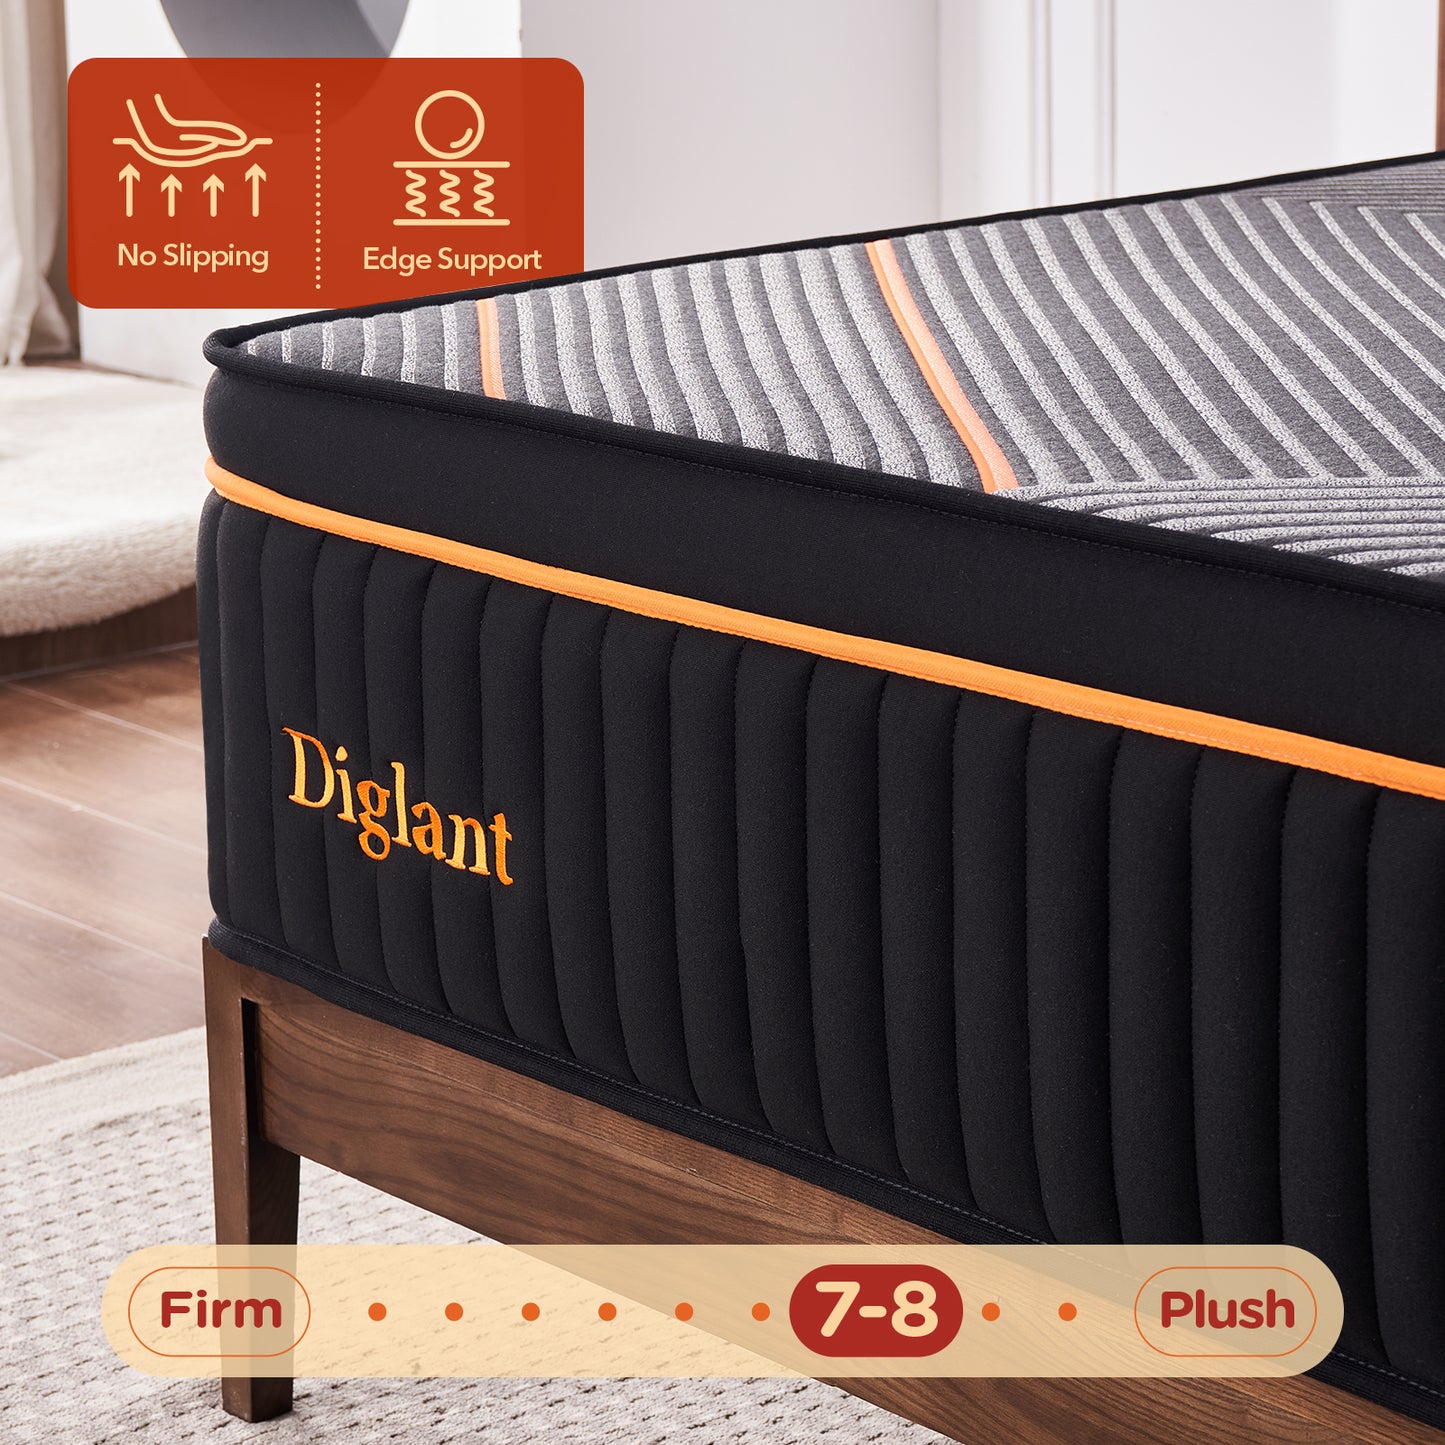 DIGLANT 14Inch Plush Memory Foam Hybrid Mattress, Cal King Size Mattress in Box with Individual Pocket Spring, Black Soft Mattress for Pressure Relief,CertiPUR-US